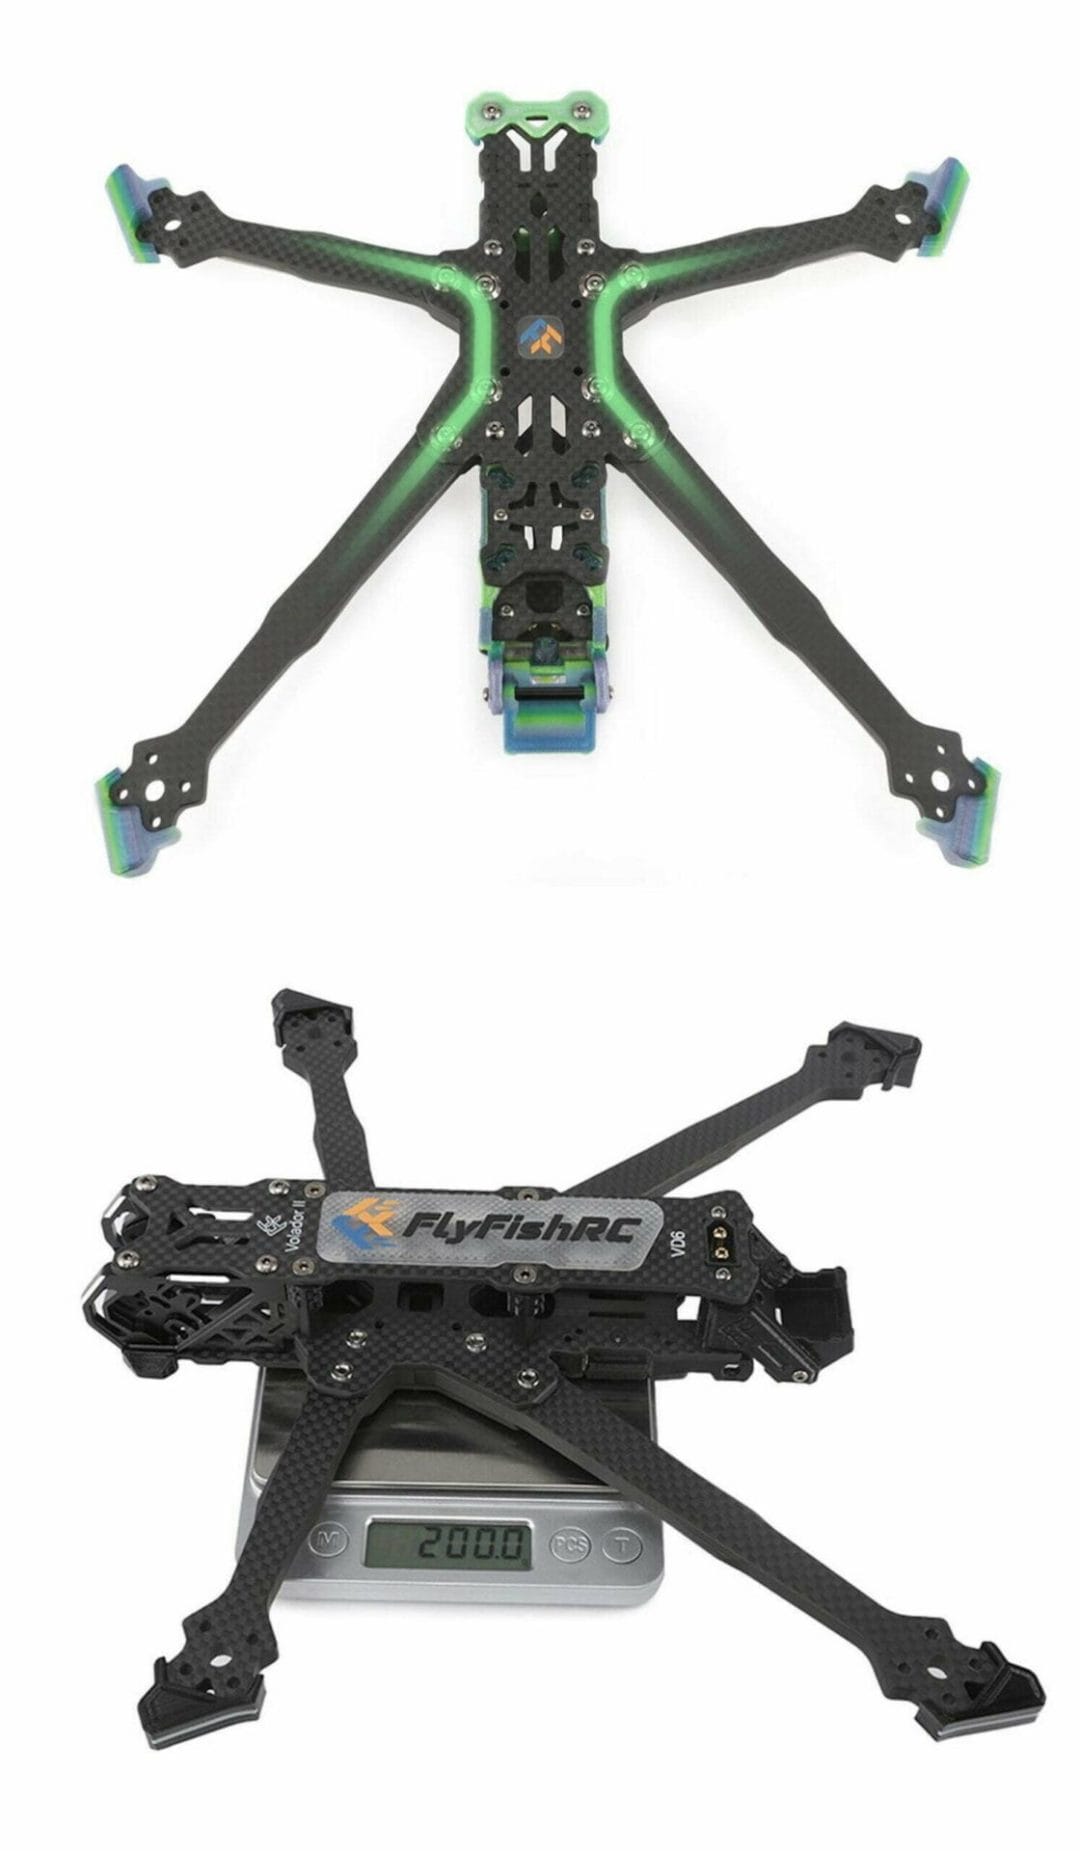 flyfish rc volador ii vd6 deadcat fpv freestyle t700 frame kit description 06 scaled